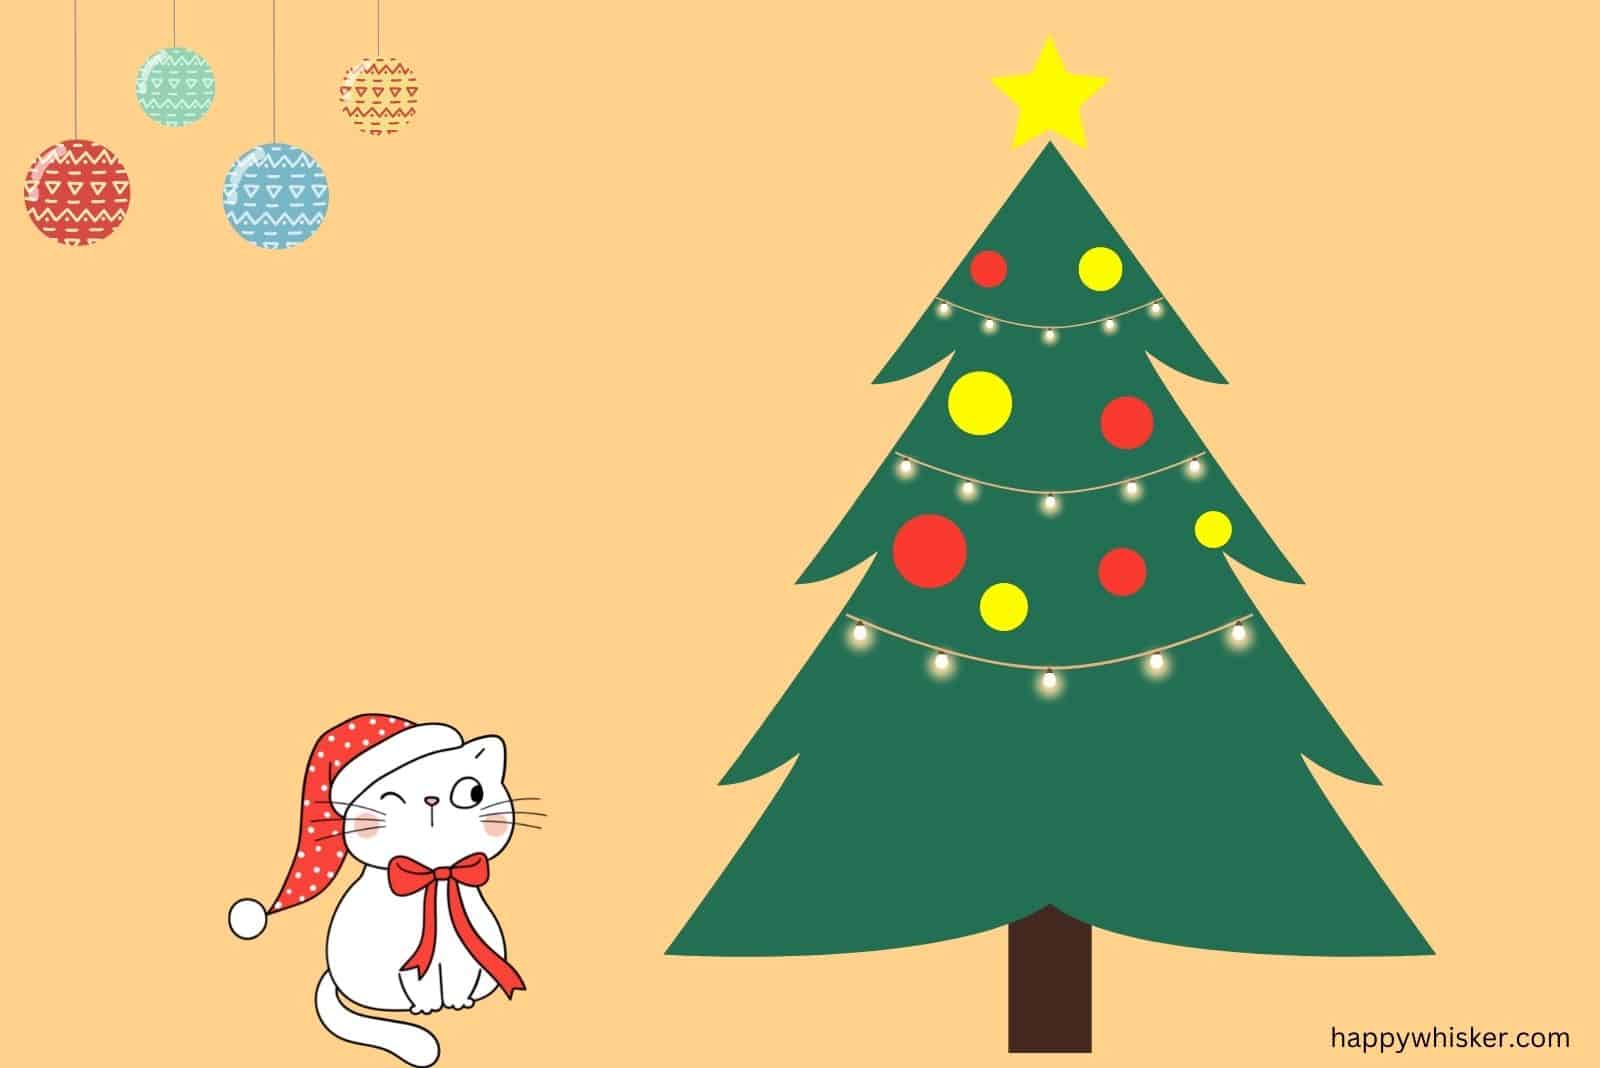 cat next to a tree with ornaments placed higher